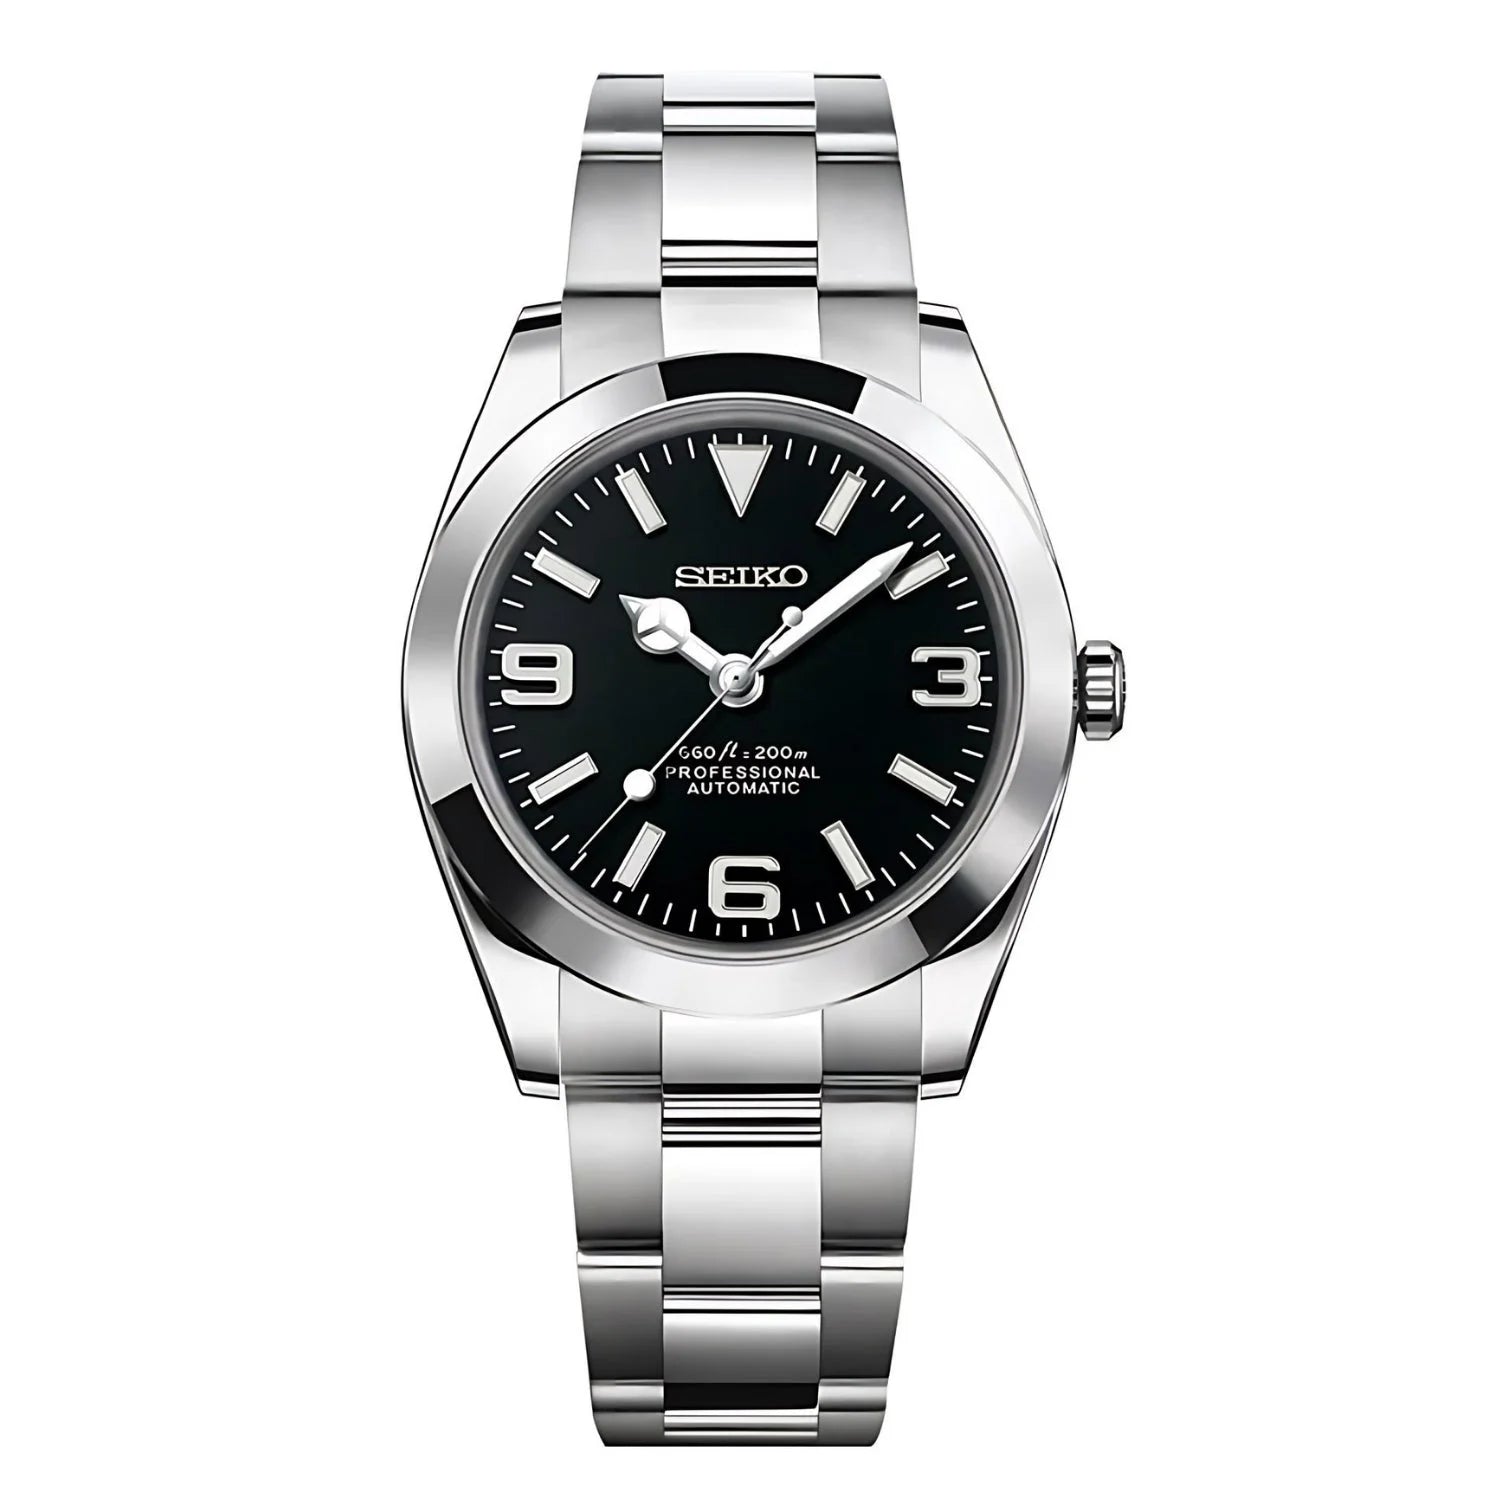 Oysteiko Black Explorer: Stainless Steel Seiko Mod Oyster With Black Dial & Silver Hands